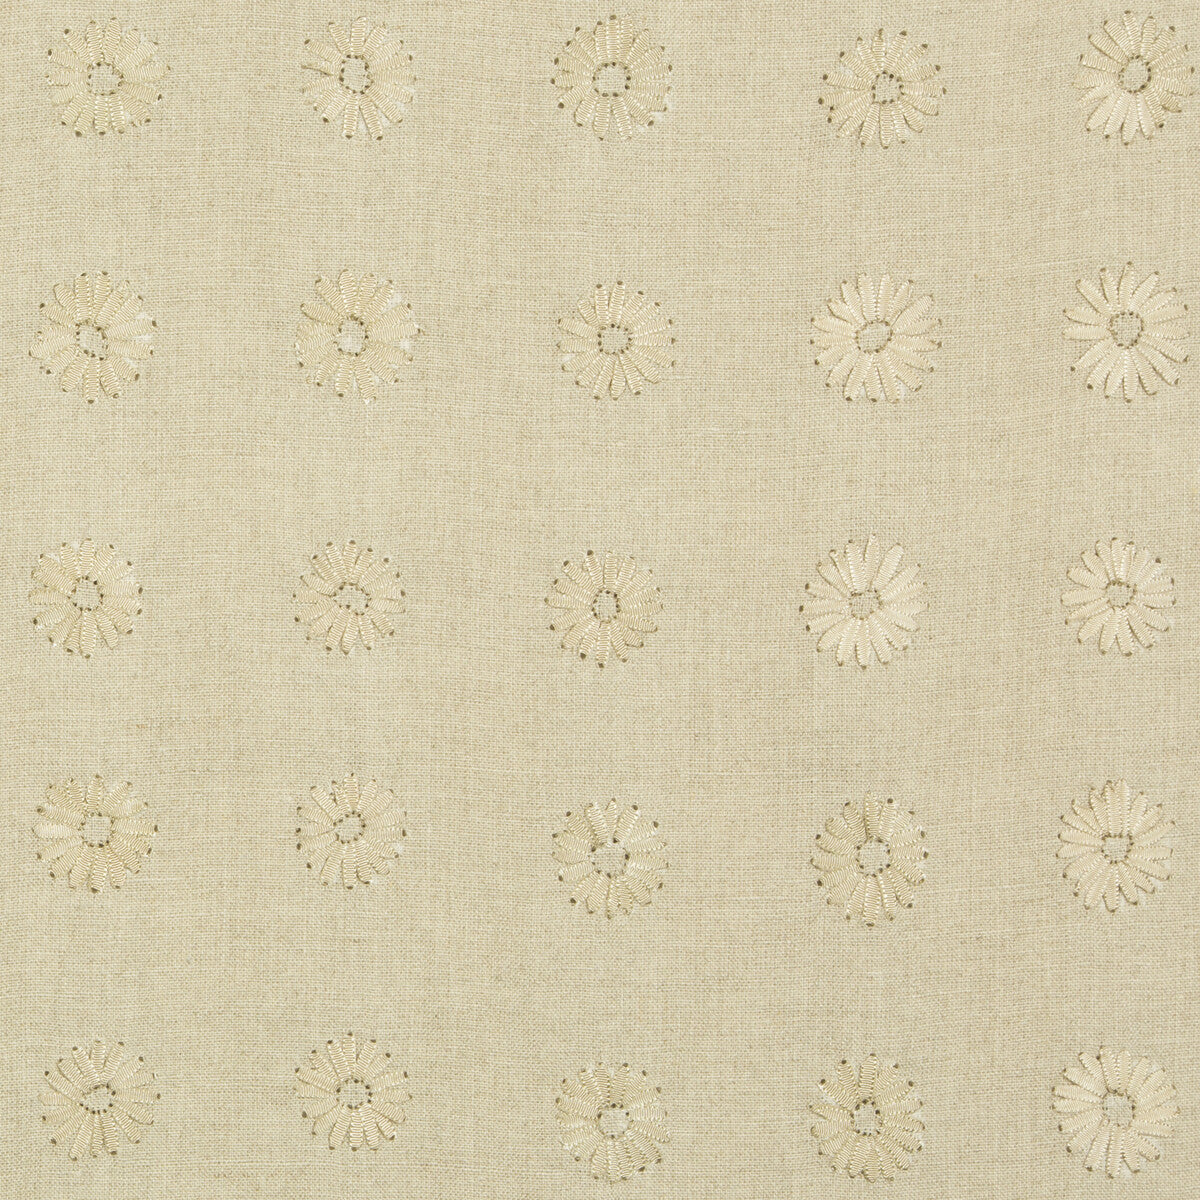 Daisy fabric in linen color - pattern 4077.16.0 - by Kravet Couture in the Calvin Klein Home collection